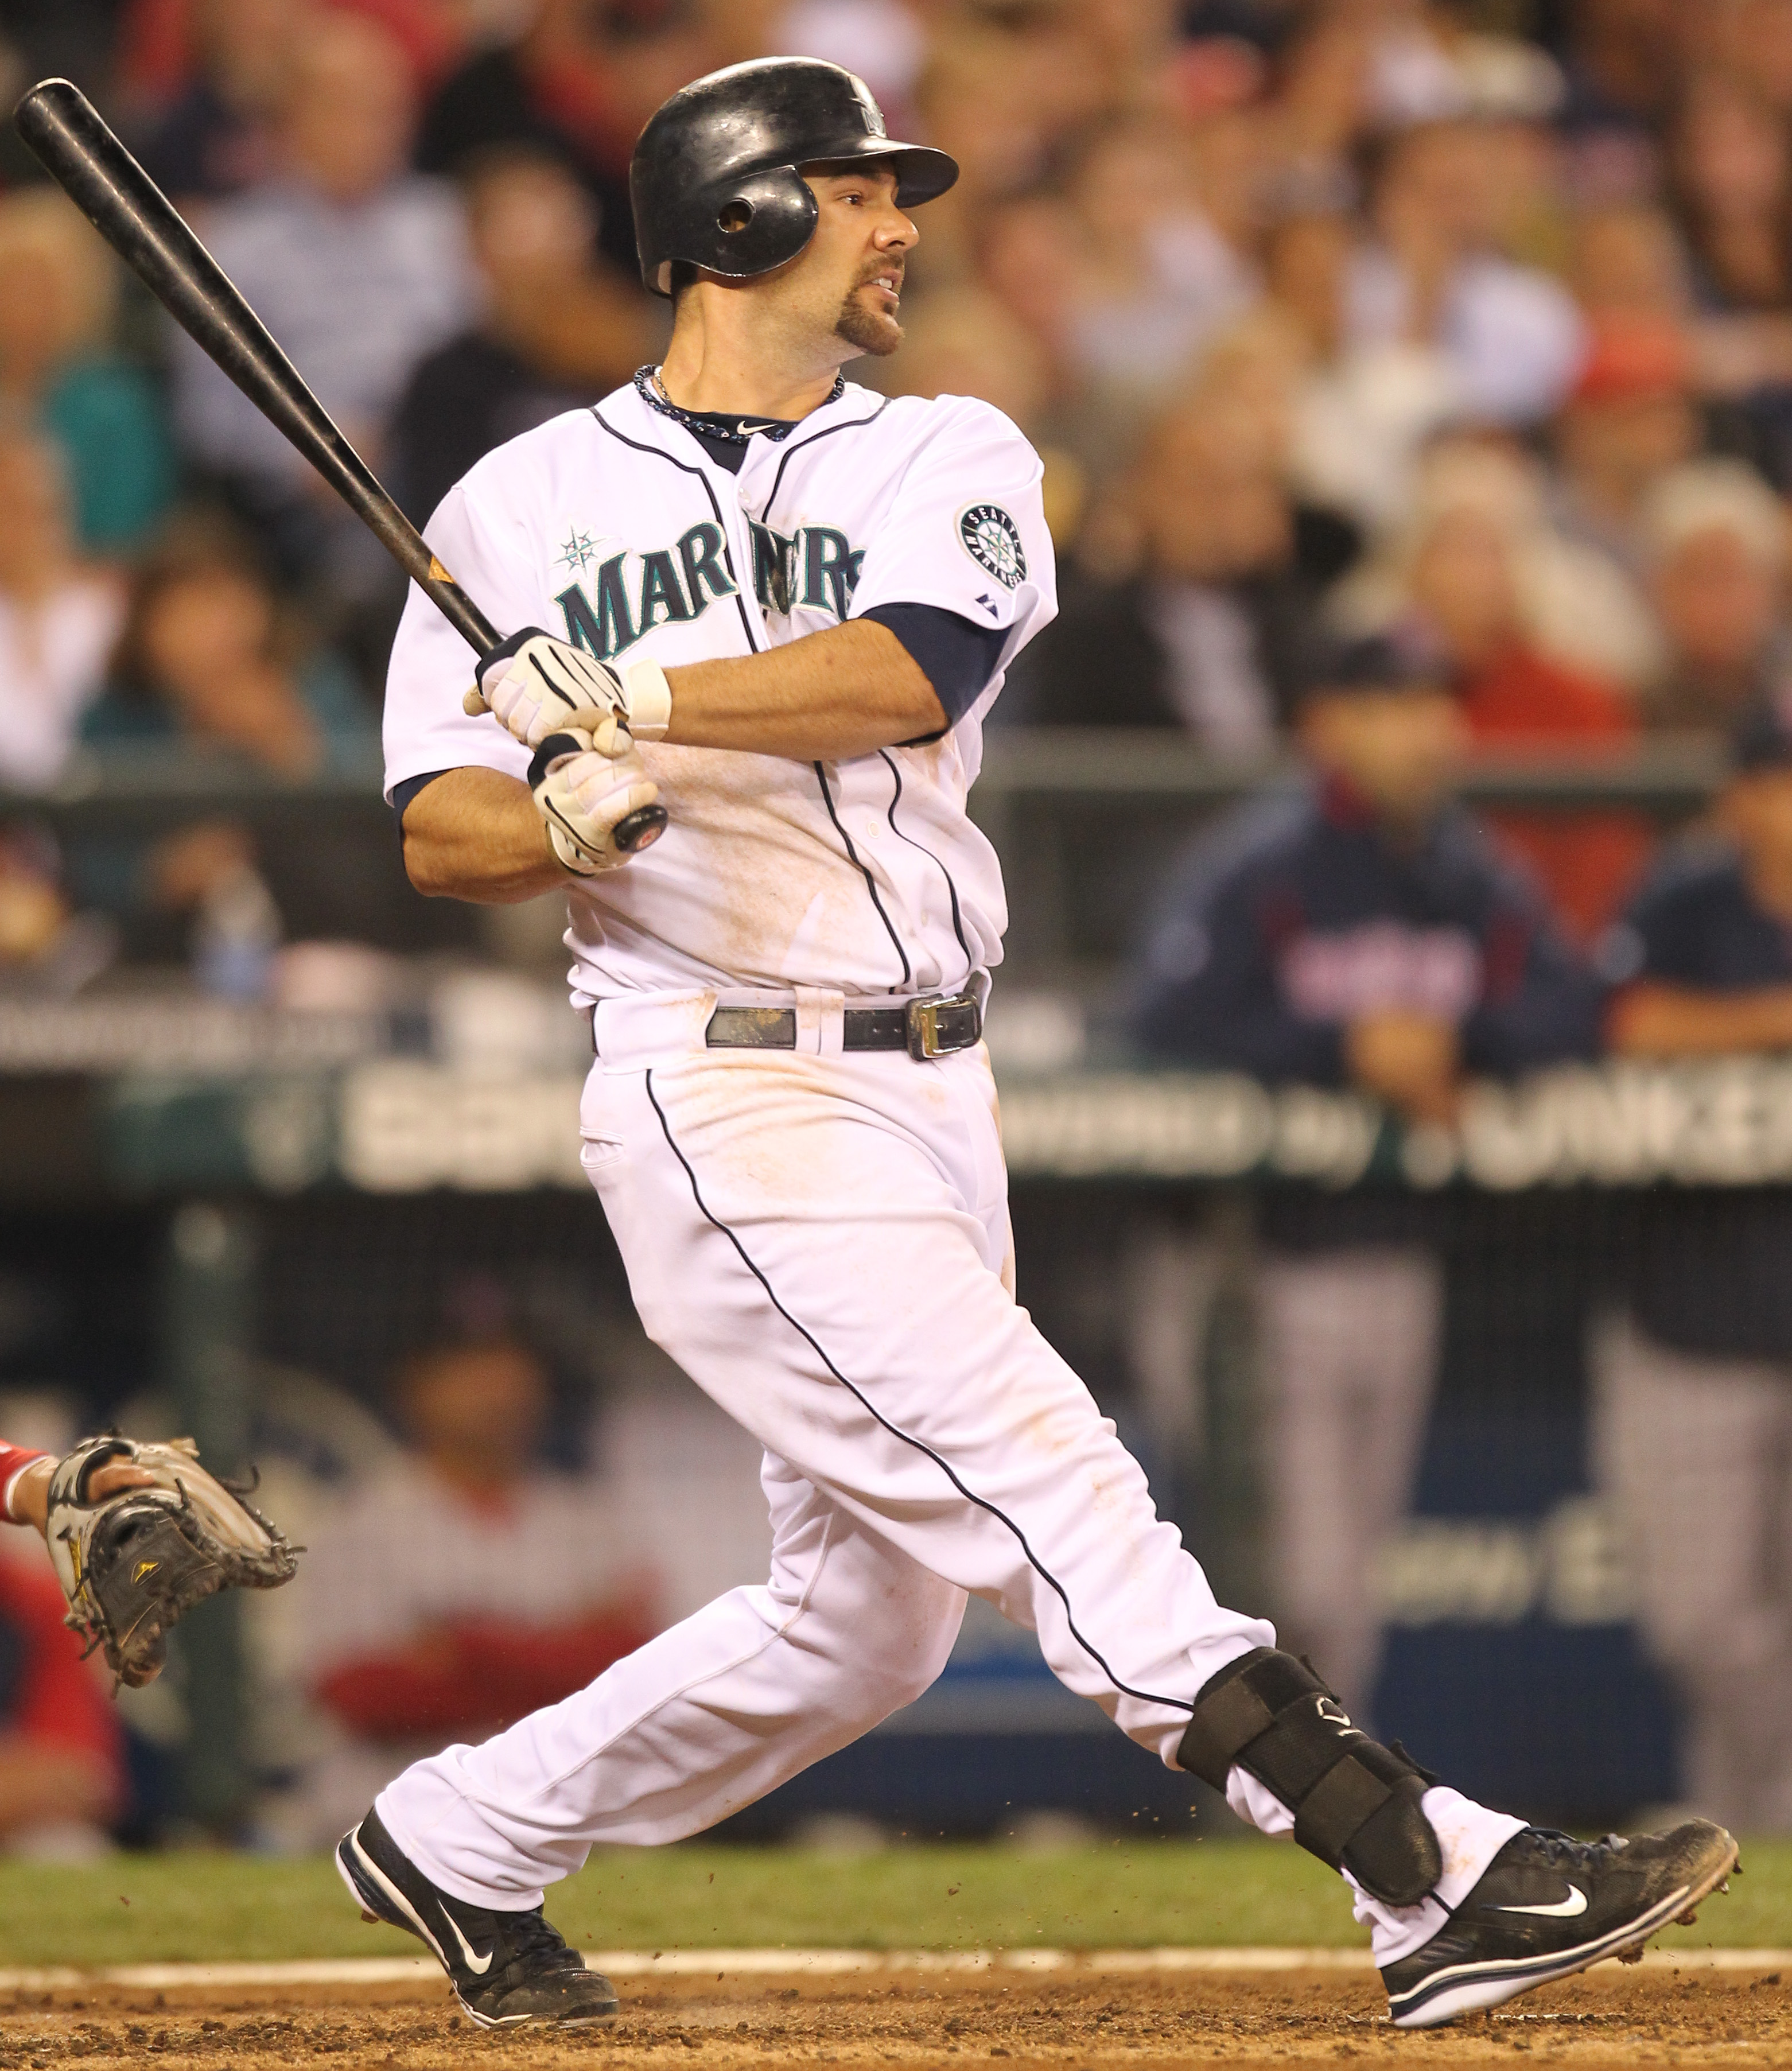 SEATTLE - SEPTEMBER 15:  Casey Kotchman #13 of the Seattle Mariners bats against the Boston Red Sox at Safeco Field on September 15, 2010 in Seattle, Washington. (Photo by Otto Greule Jr/Getty Images)